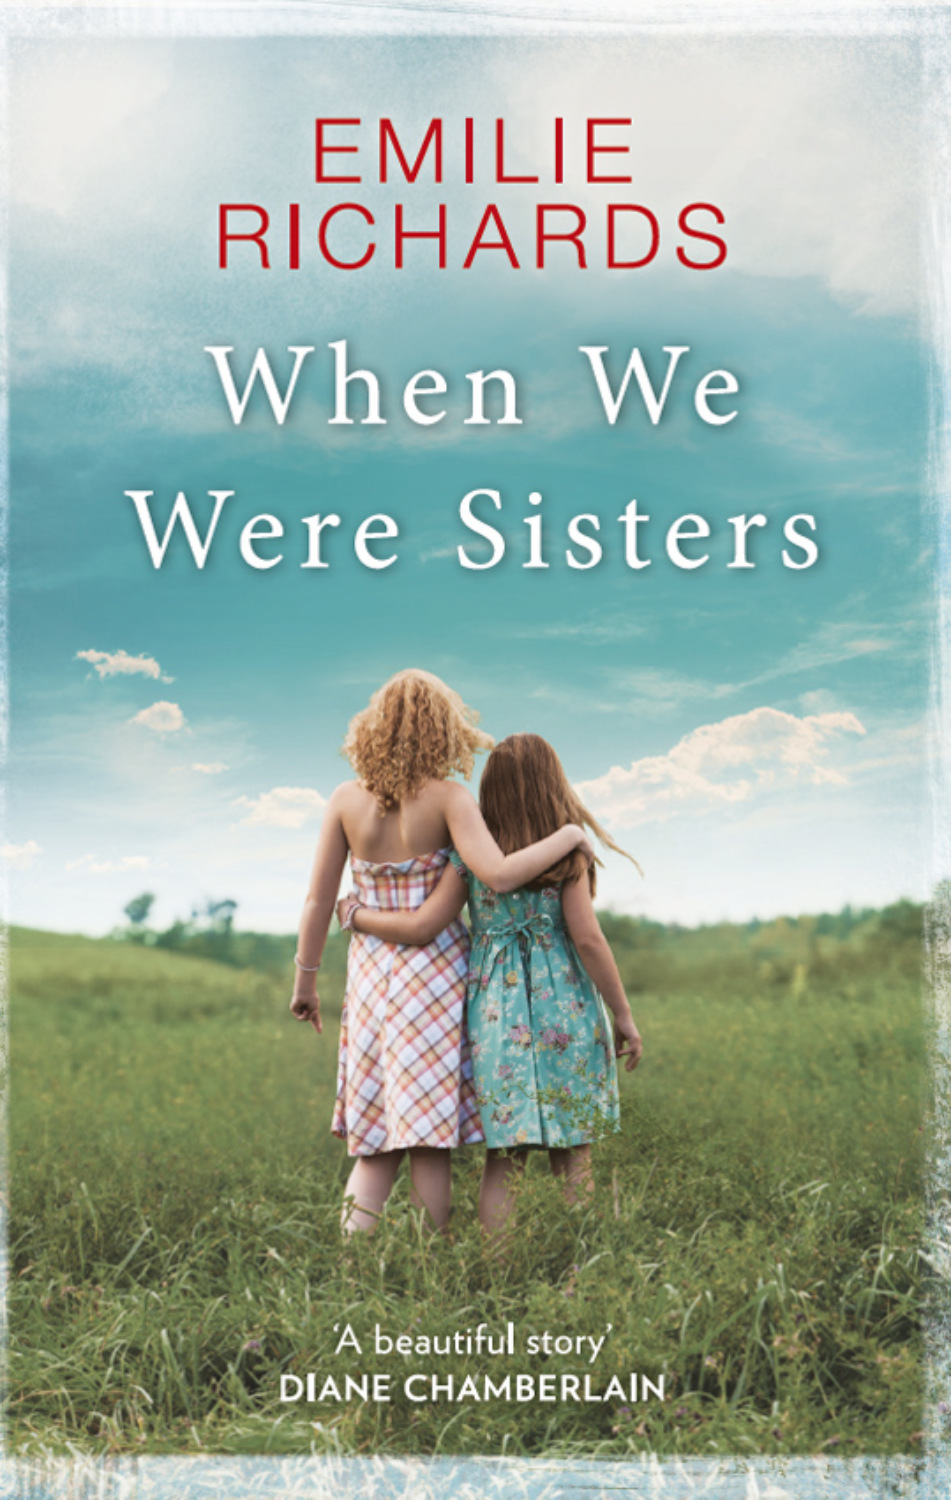 My sister were having. Emily Richards. Книга сестры. Books about sisters. Books about sisters Love.